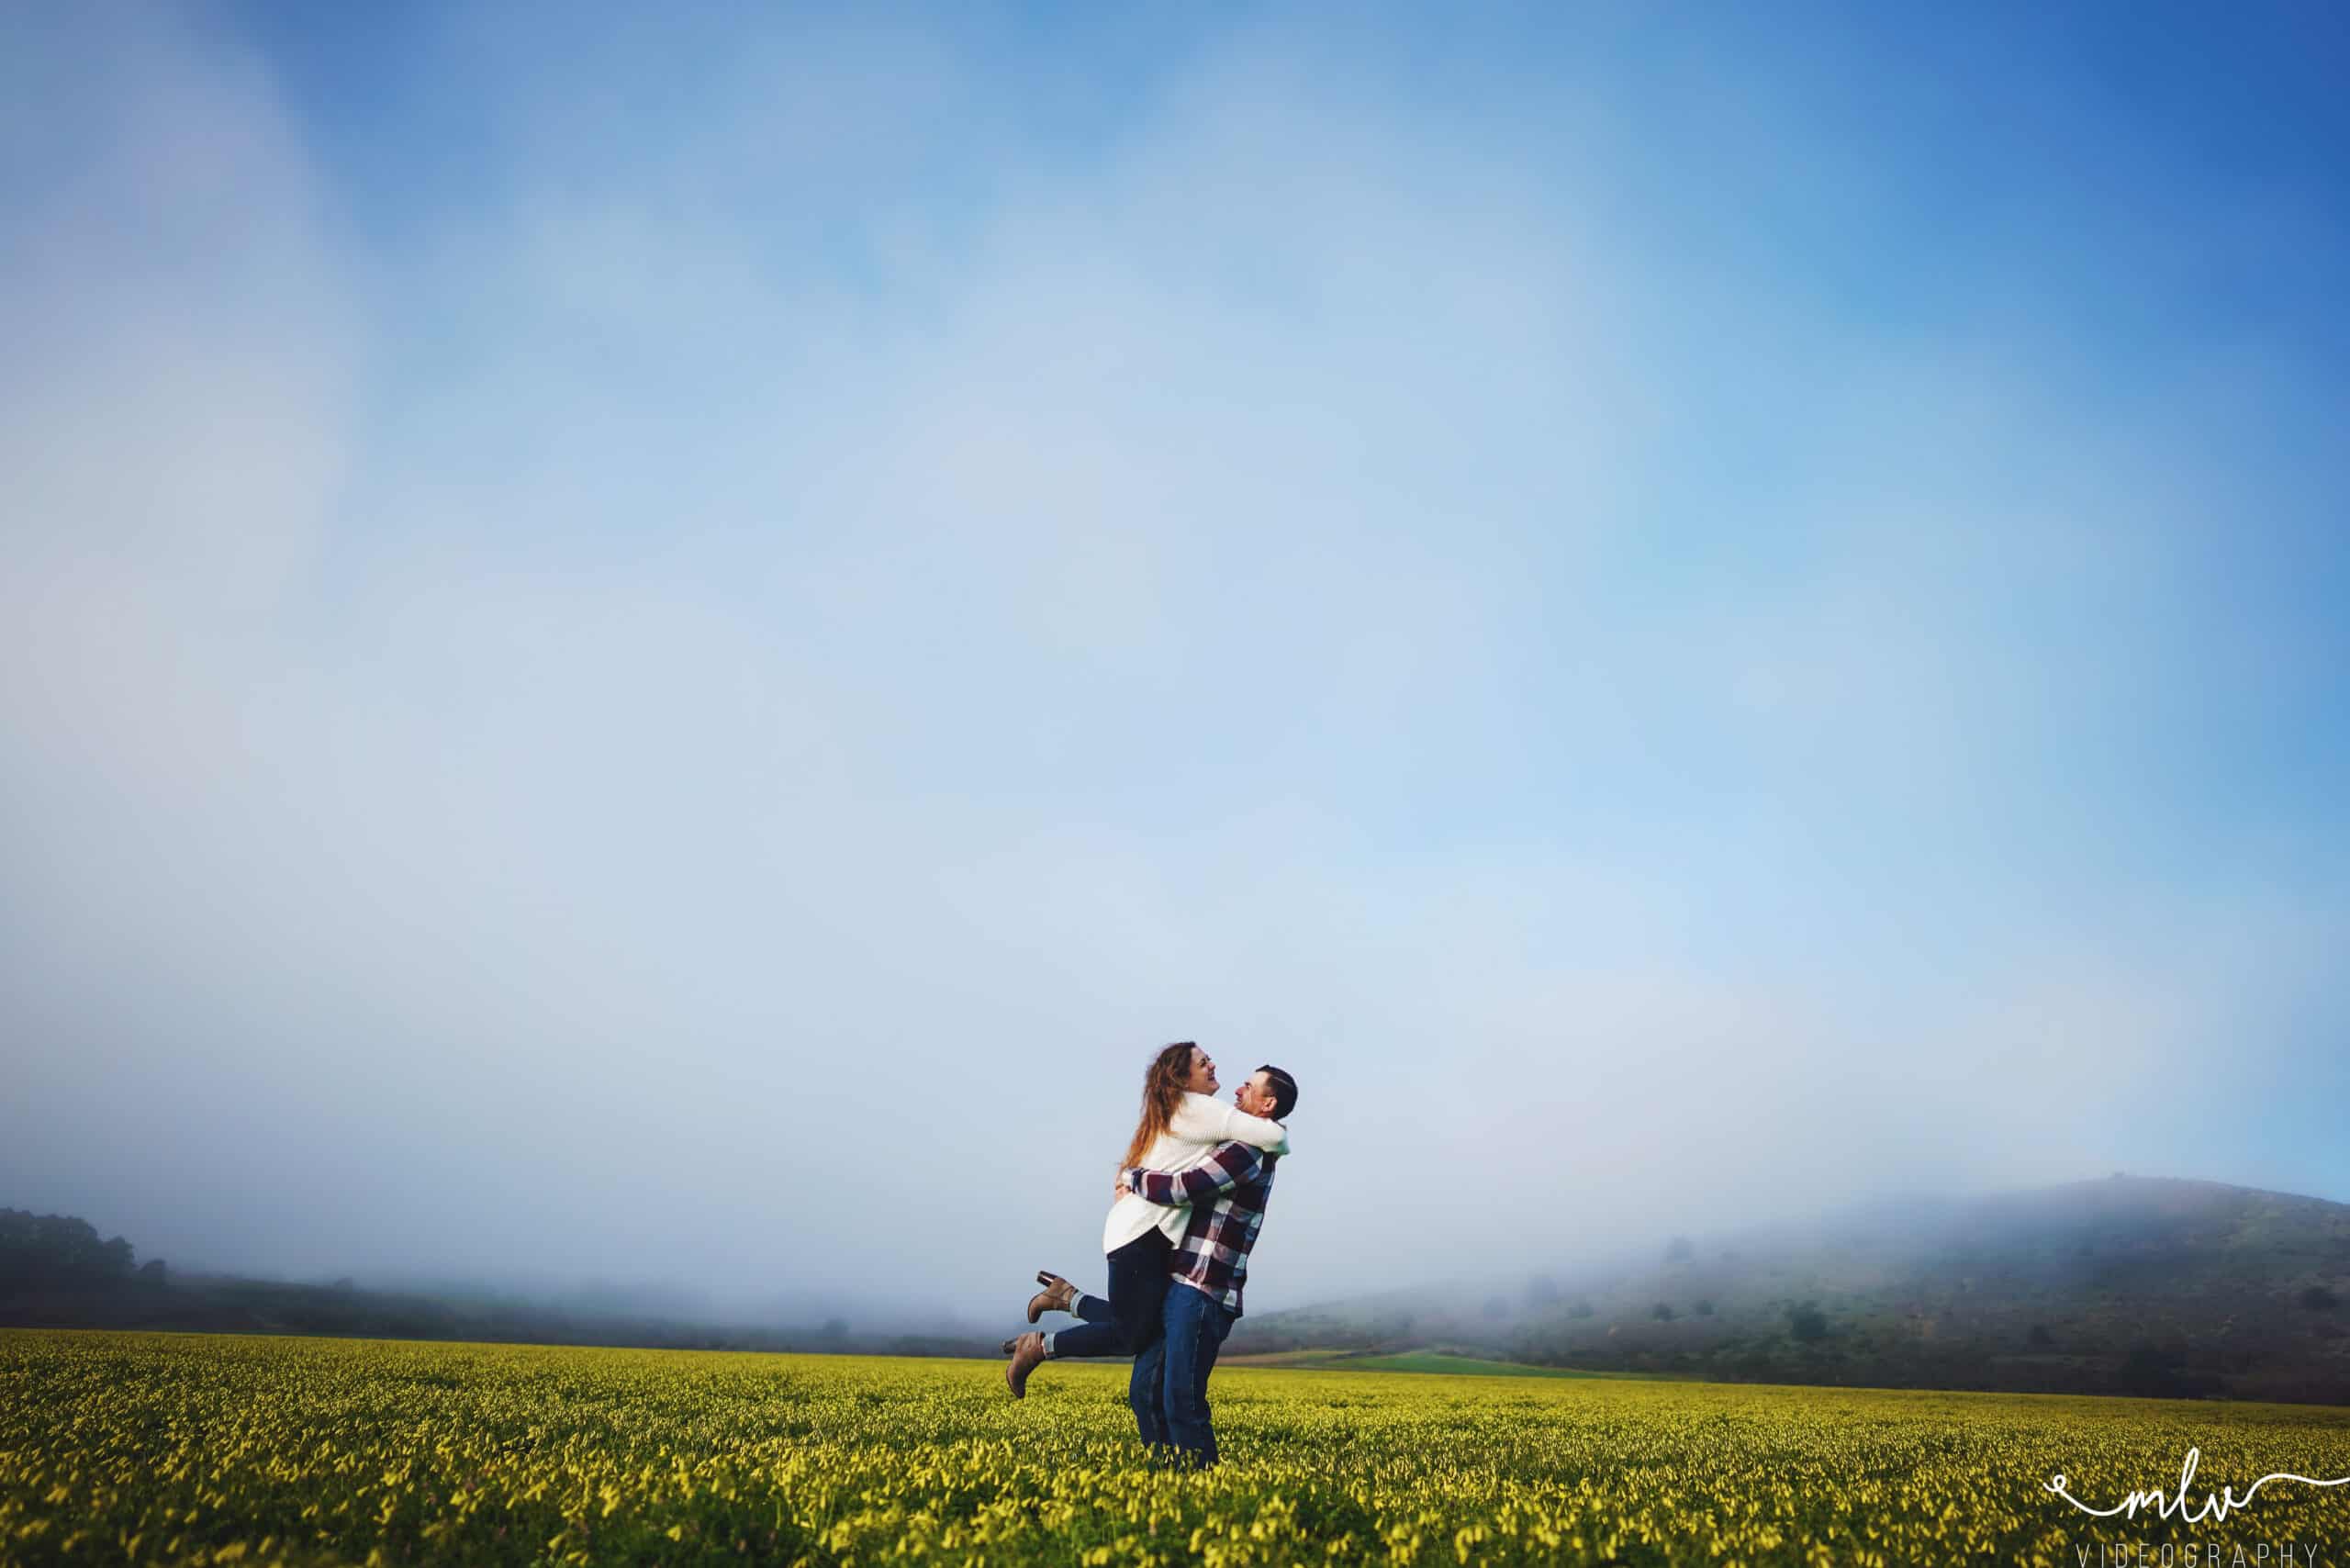 Engagement Photography in Half Moon Bay, California